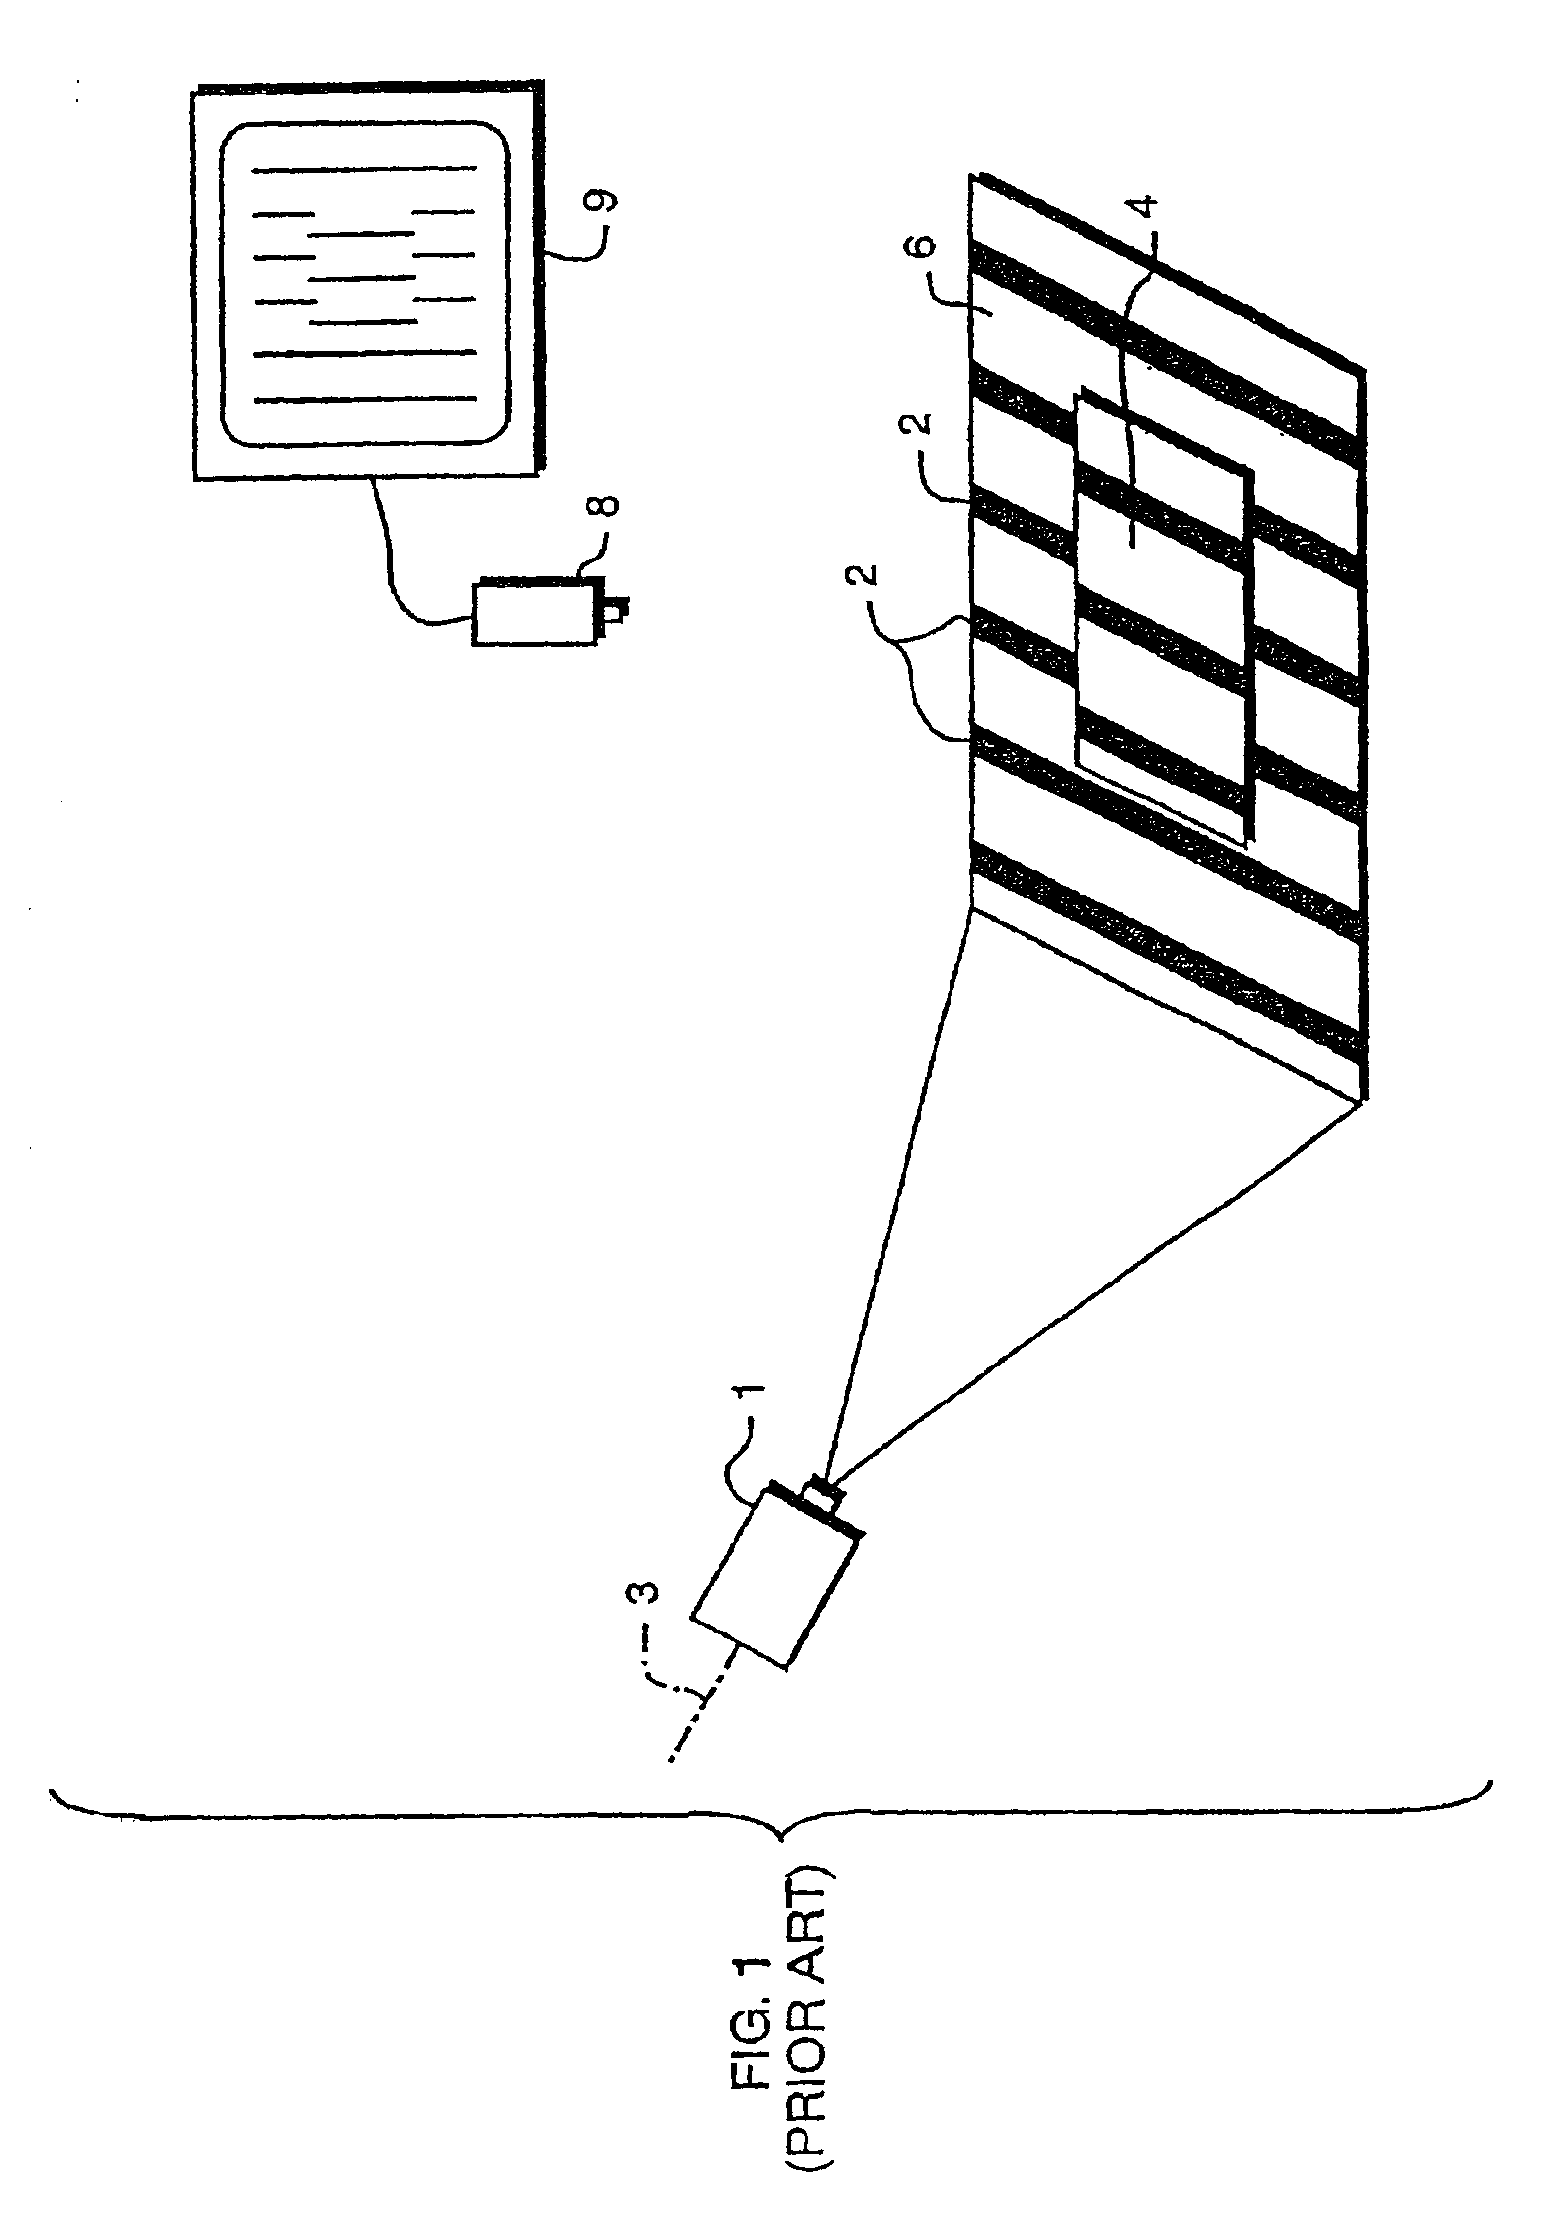 Method for three-dimensional inspection using patterned light projection